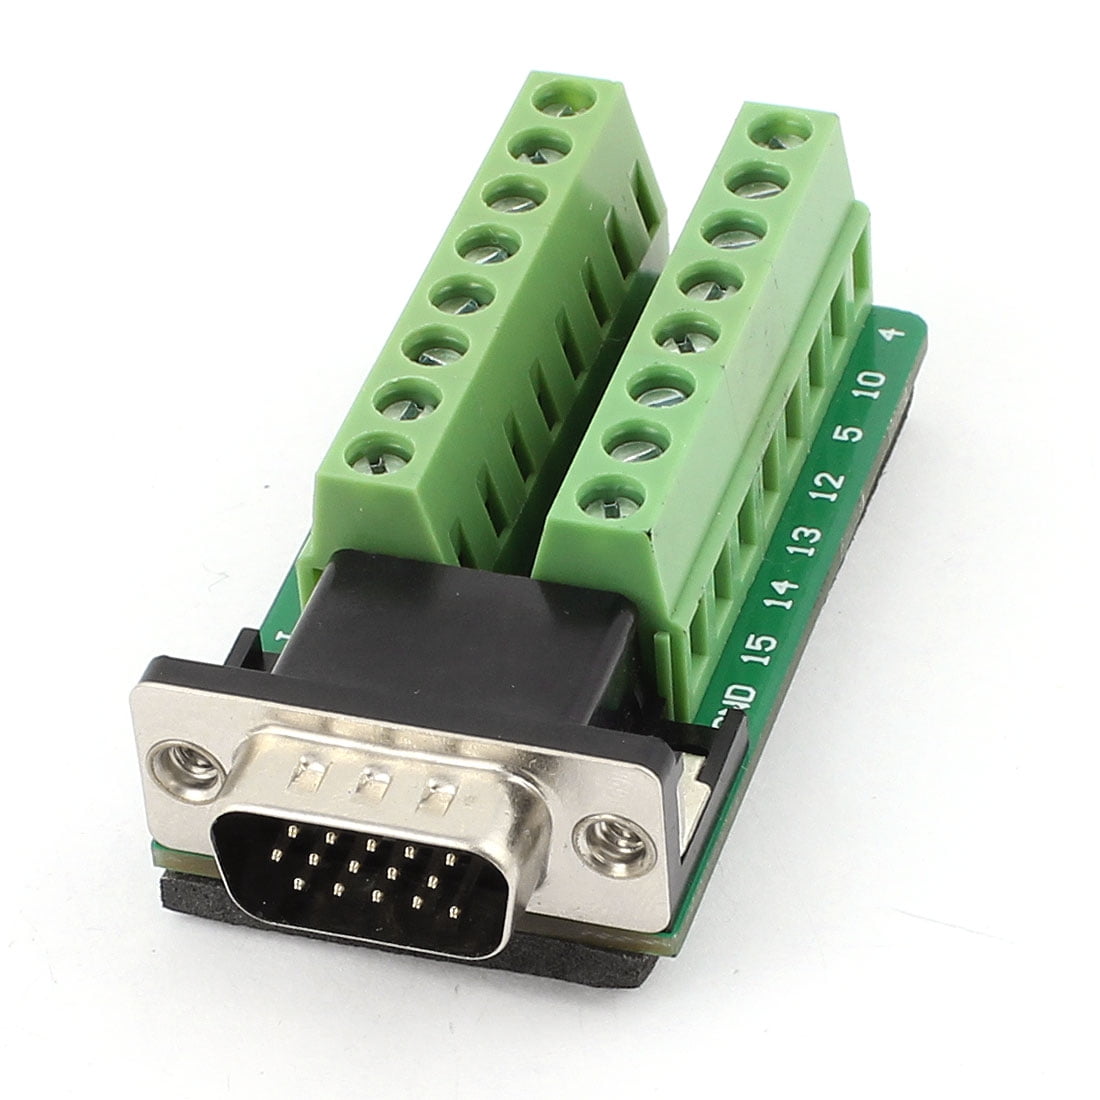 DB15Adapter D-SUB DB15 VGA Female 3Row 15Pin to Terminal Breakout Board Connectors with case 